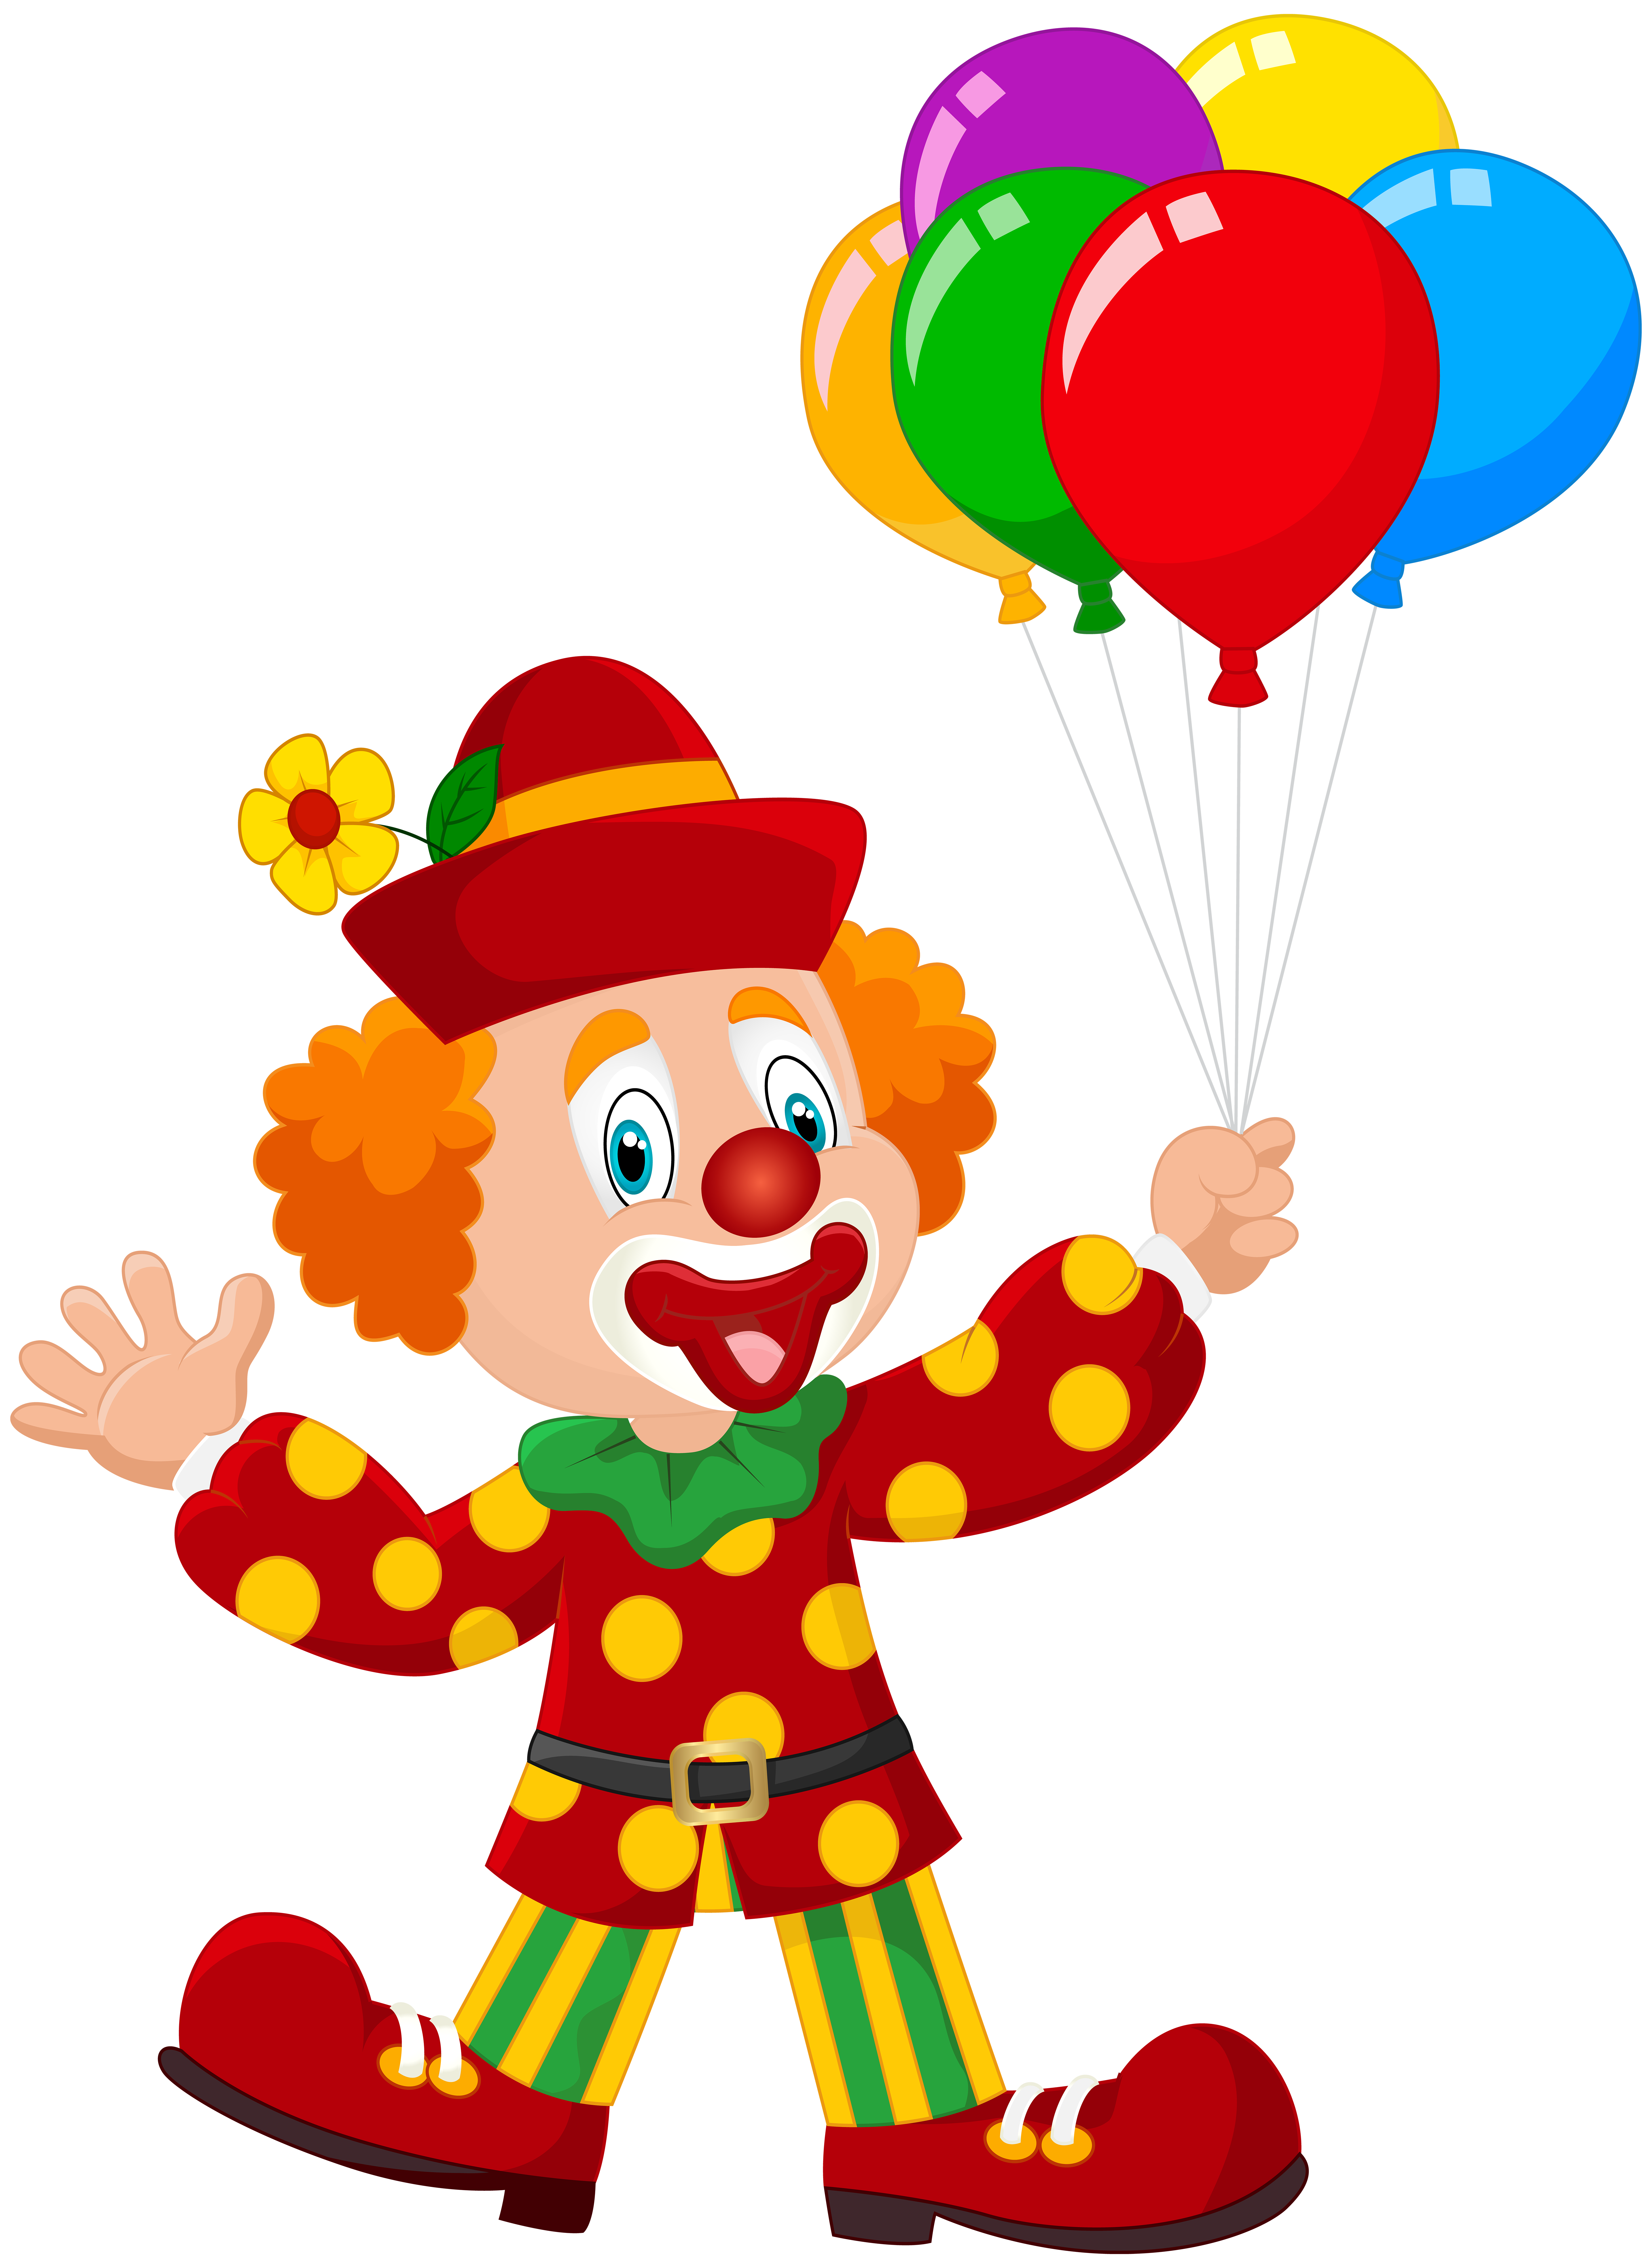 Clown with Balloons Transparent Image